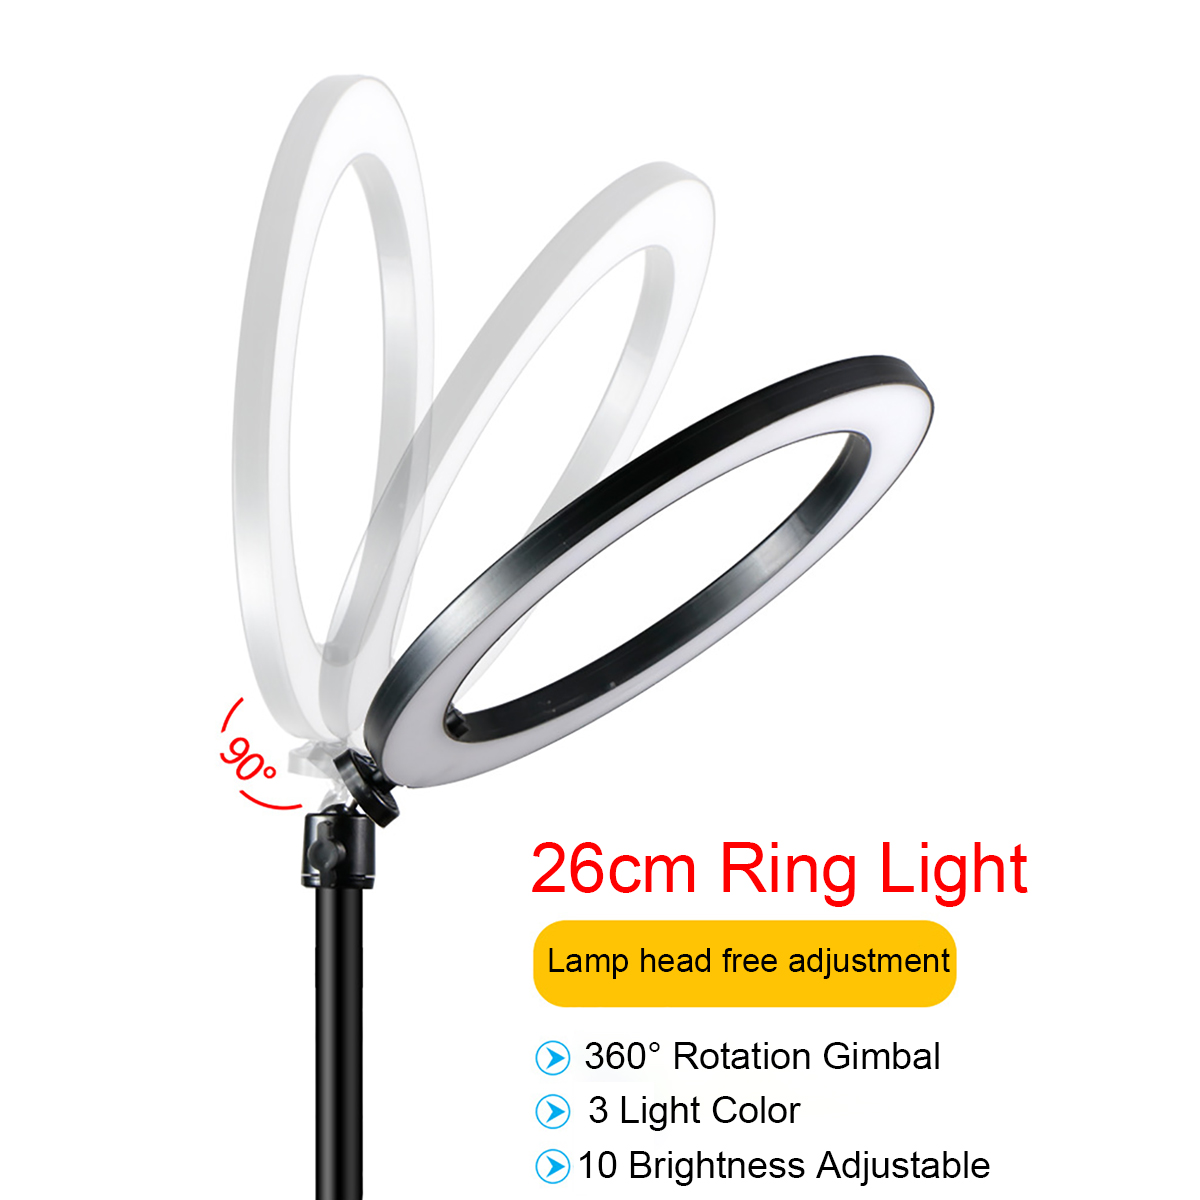 26cm-LED-Ring-Light-3-Color-10-Brightness-Dimmable-Fill-Light-with-Tripod-Stand-Dual-Phone-Clip-for--1702595-6